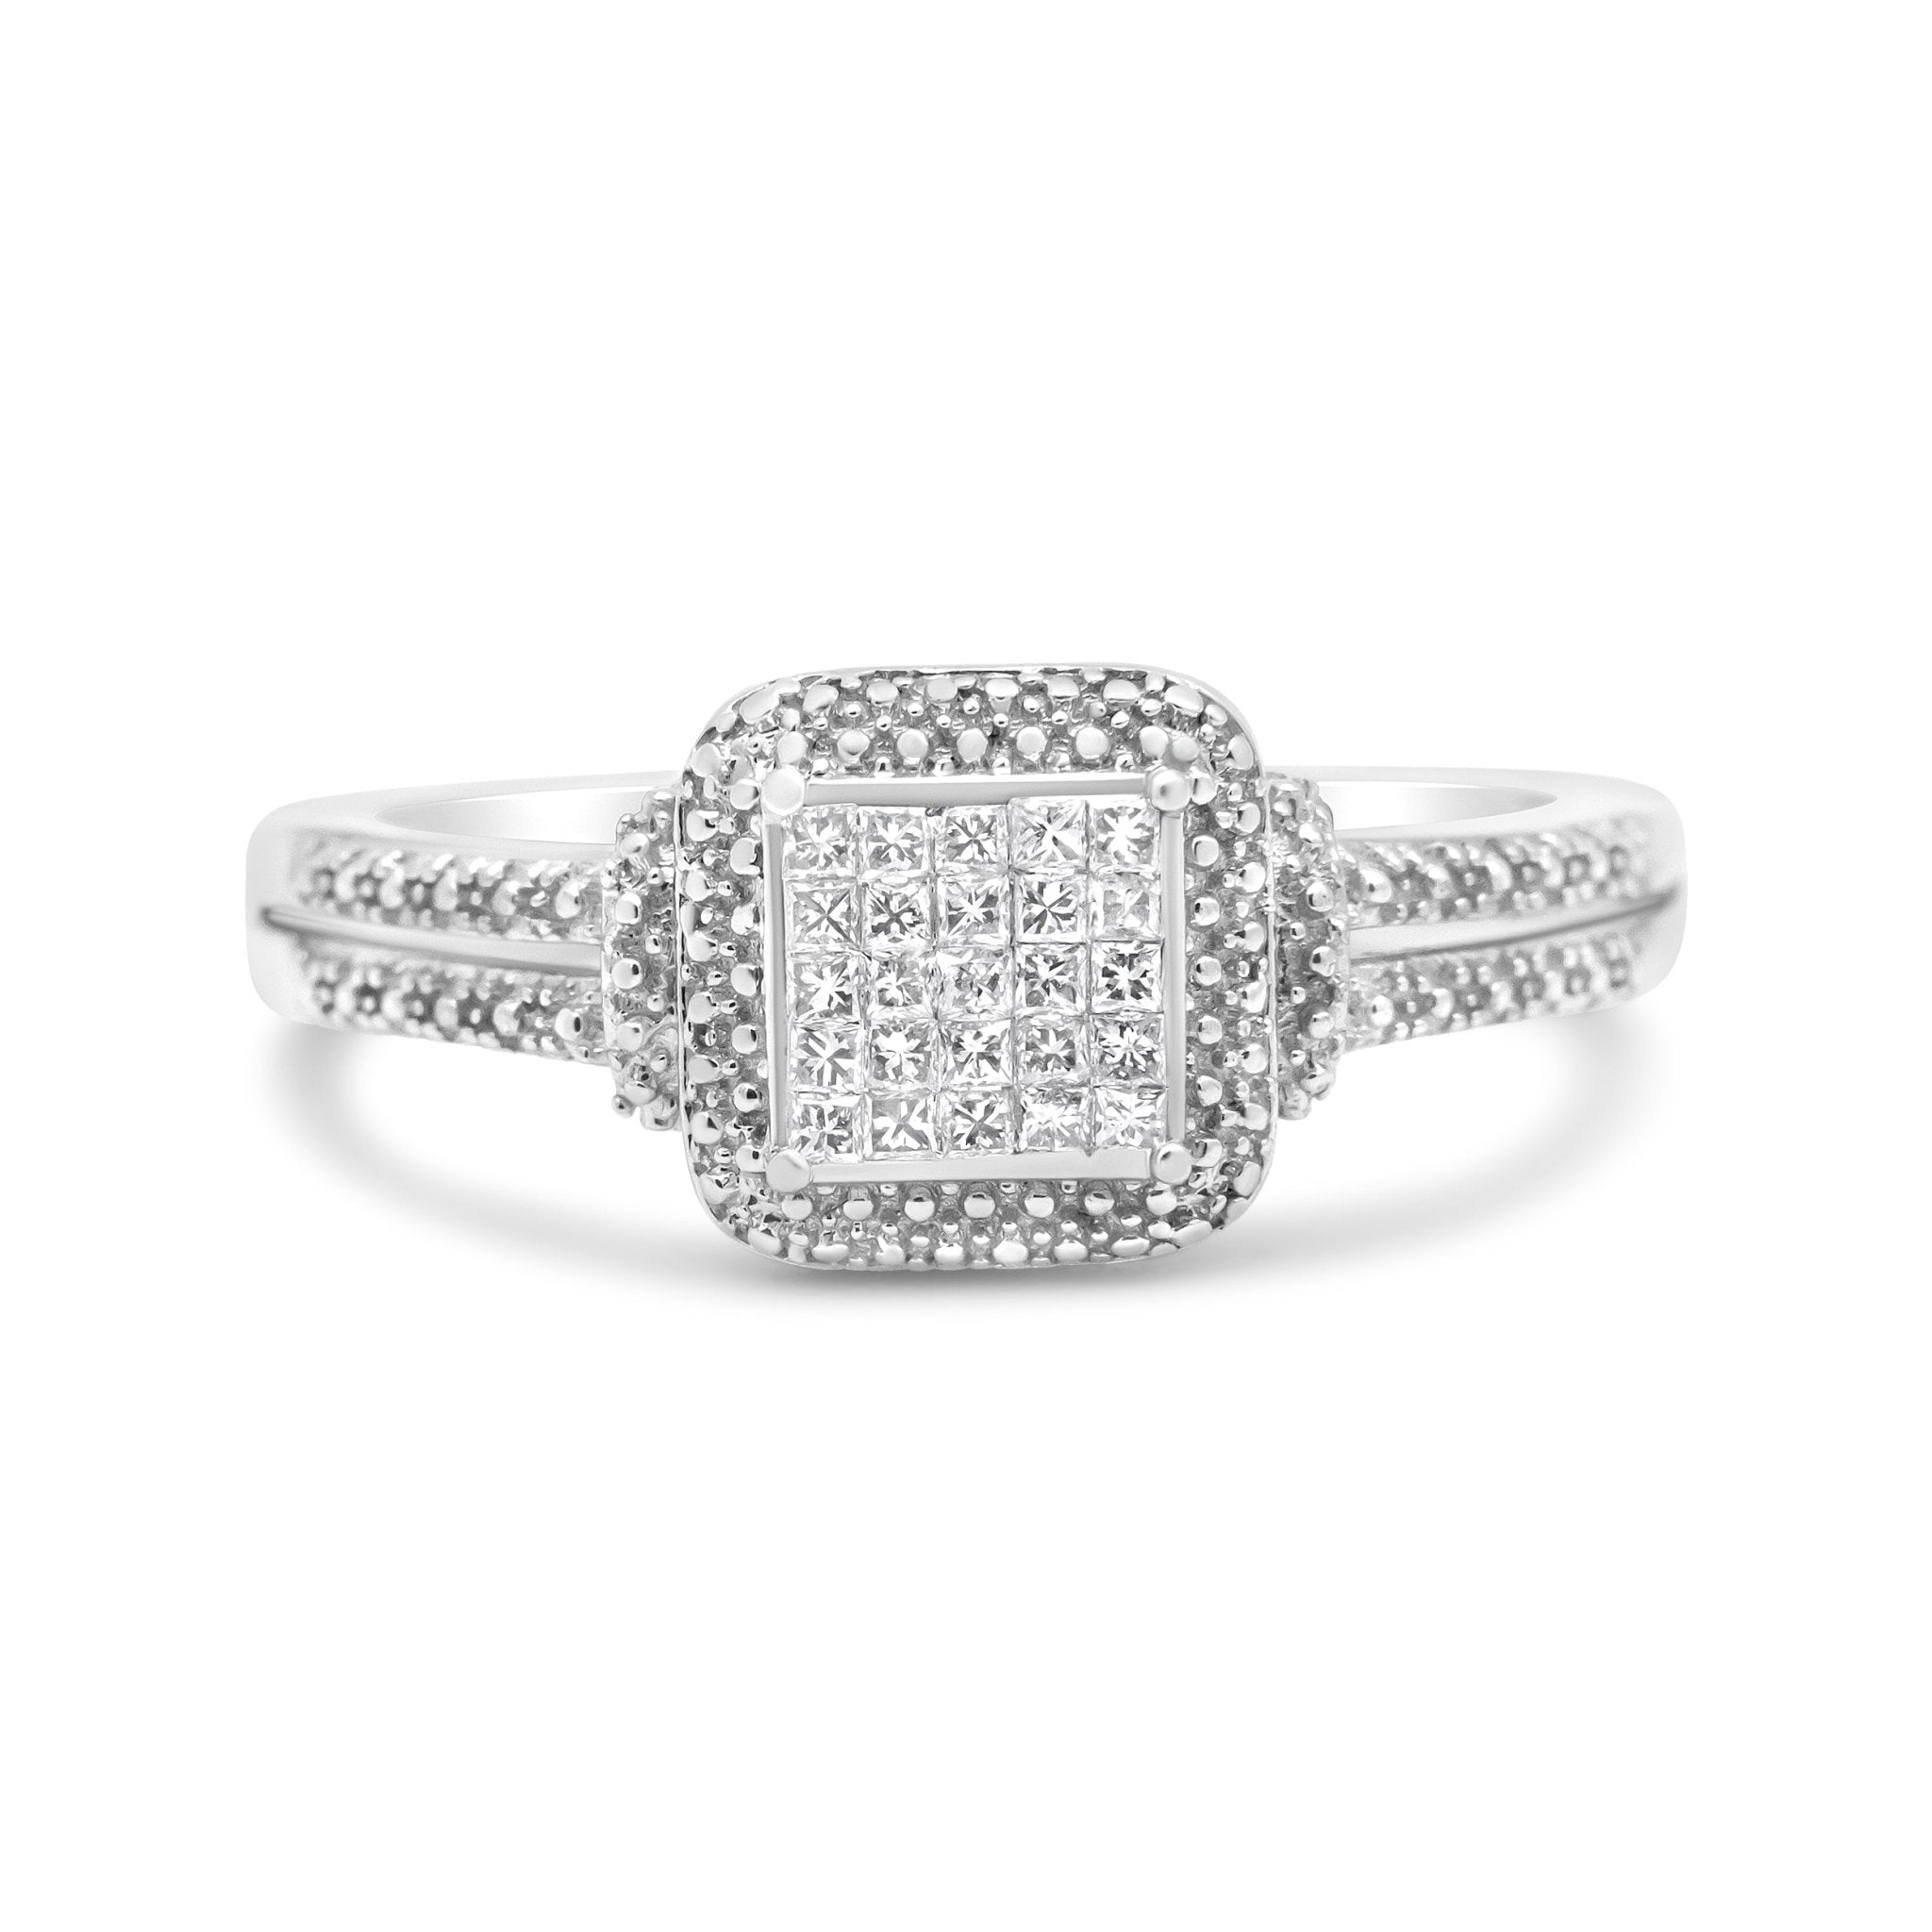 .925-Sterling-Silver-1/4-Cttw-Princess-Cut-Diamond-Composite-Ring-With-Beaded-Halo-(H-I-Color,-Si1-Si2-Clarity)-Size-9-Rings